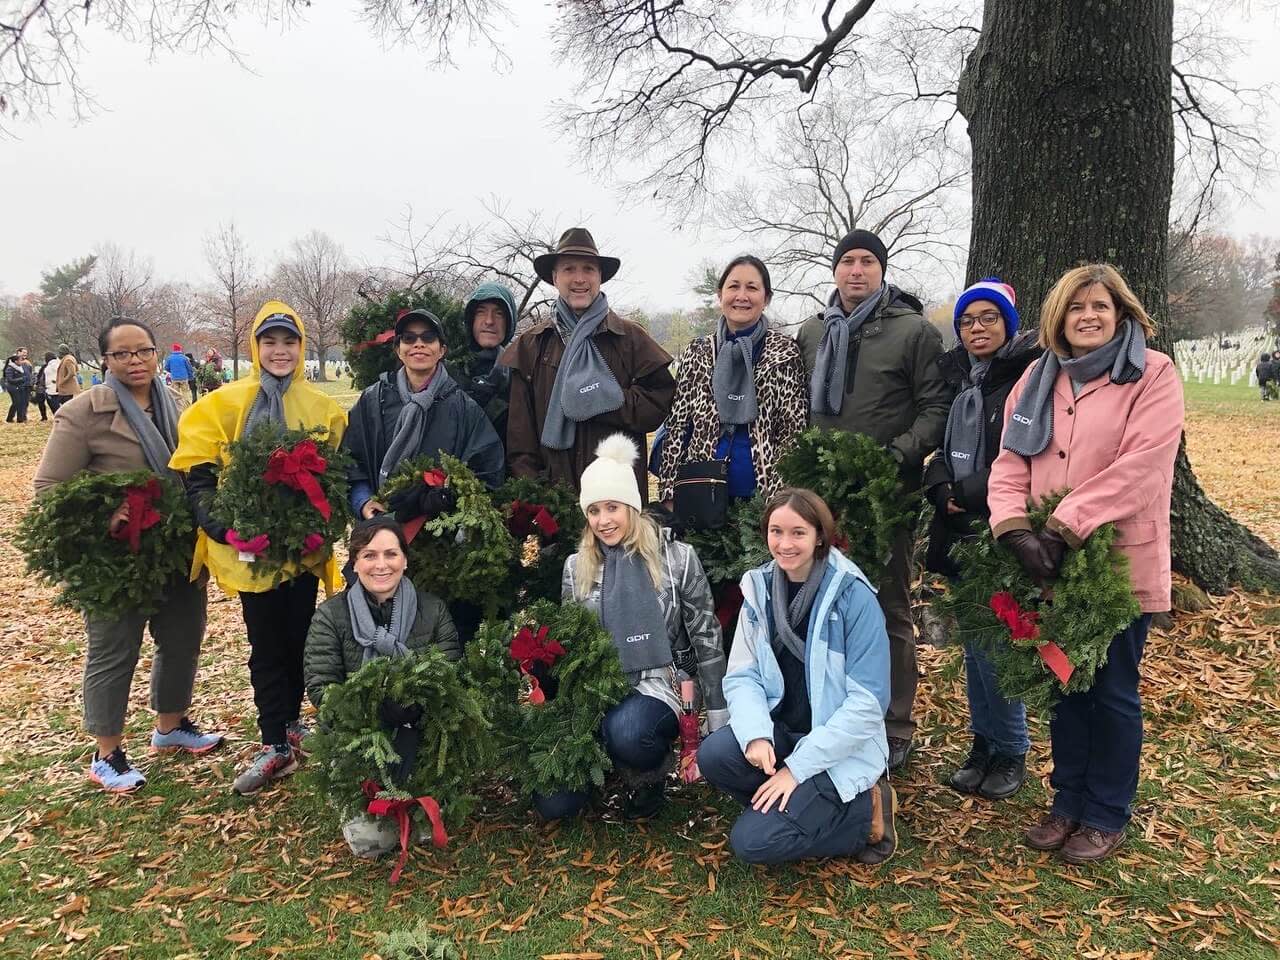 Group of people holding wreaths during Wreaths Across America event